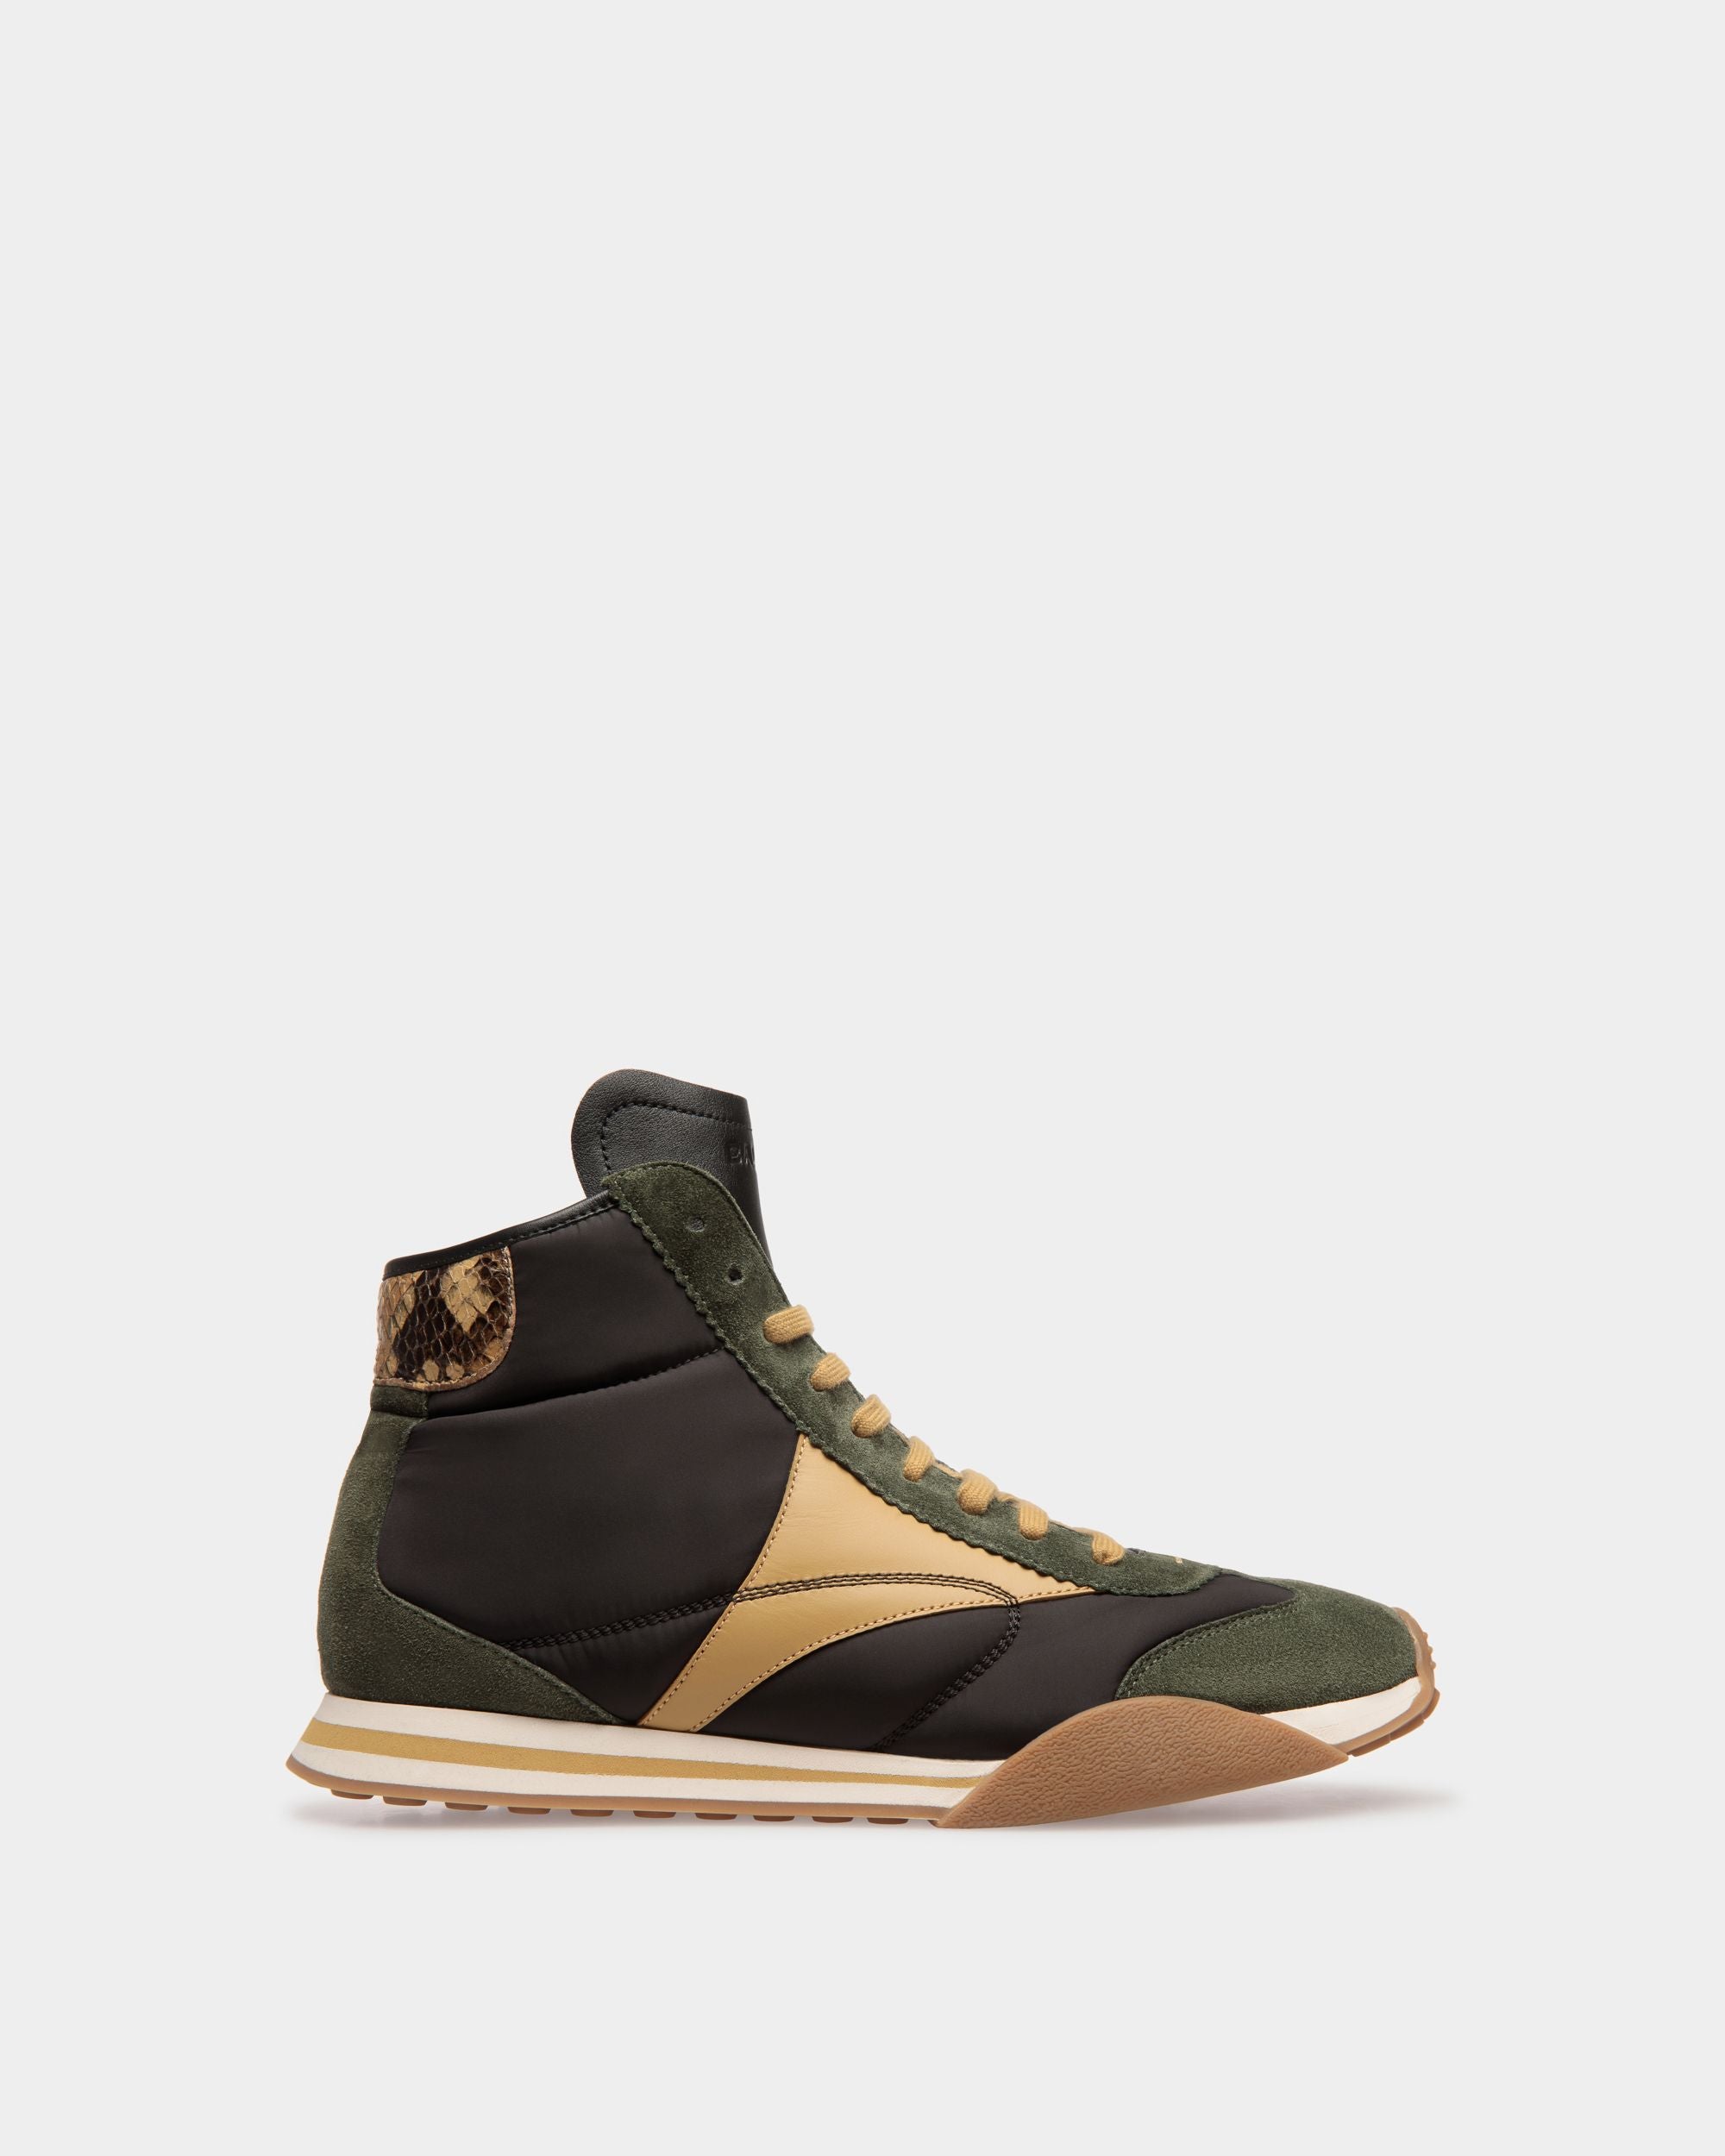 Sonney Mid Top | Men's Sneakers | Green And Black Leather And Fabric | Bally | Still Life Side